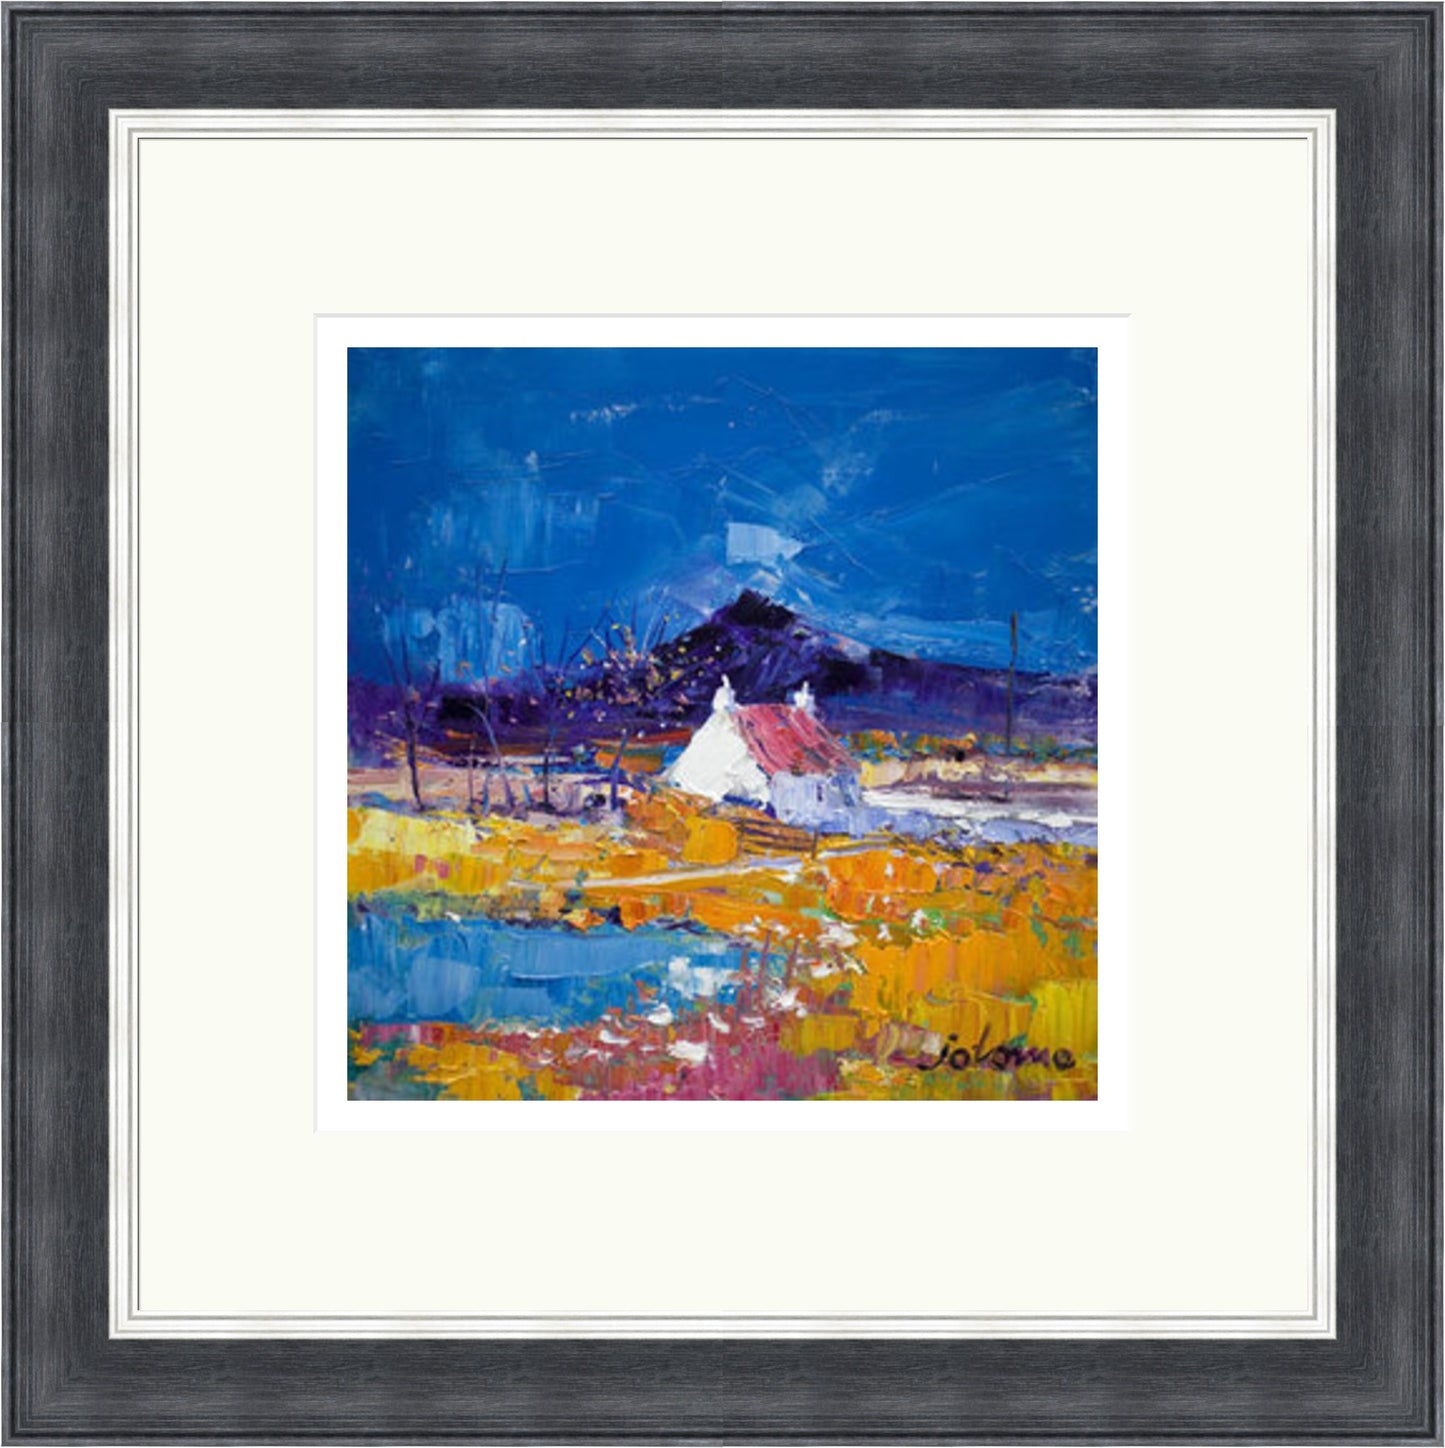 Autumn Light, Pennyghael, Isle of Mull Signed Limited Edition by John Lowrie Morrison (JOLOMO)